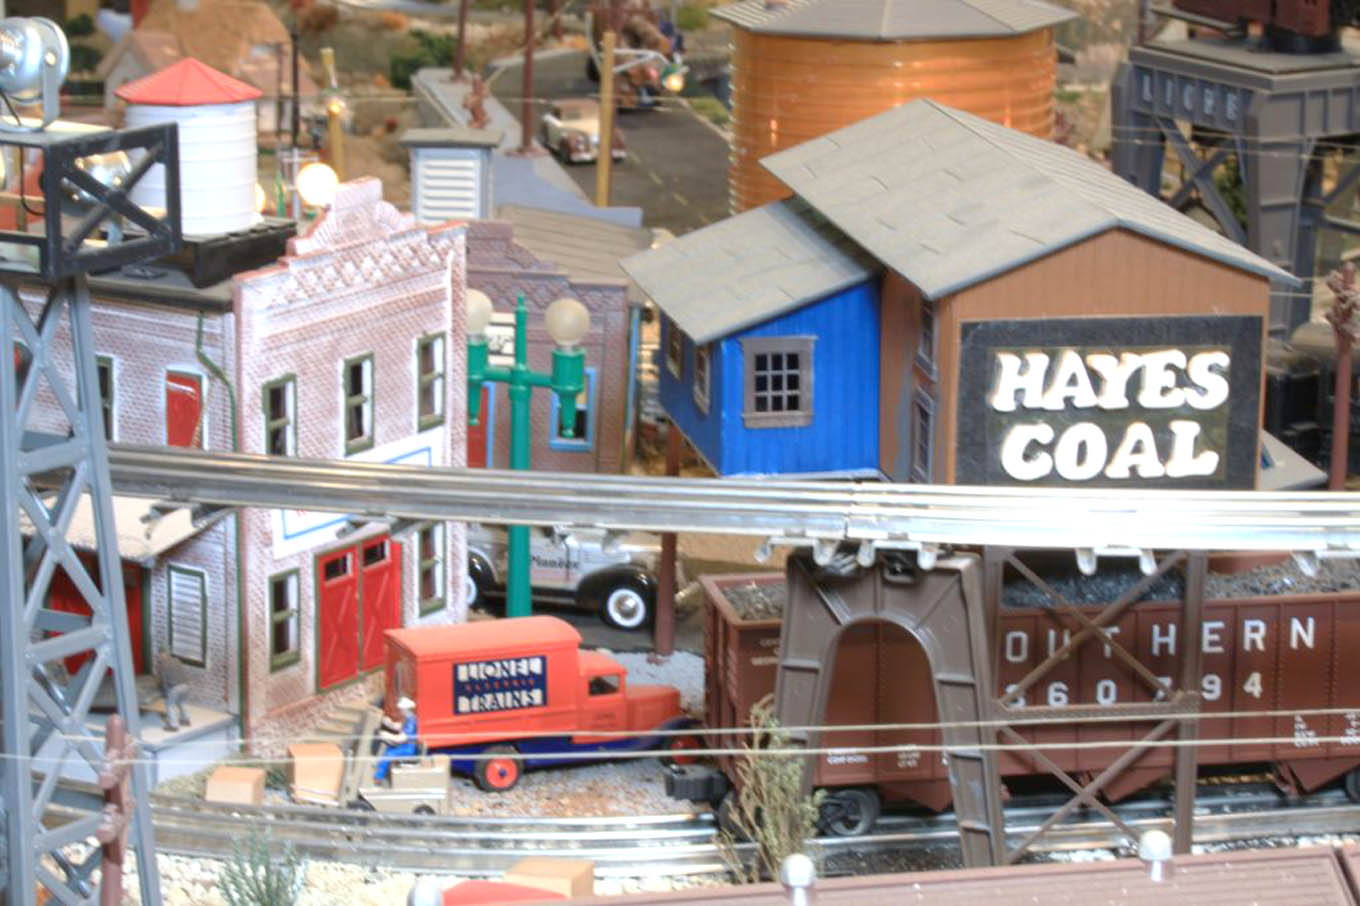 Click to enlarge,  Richard Hayes' train layout took two years to build on weekends as he traveled during the week. 'My train layout ... I fashioned after both the downtown Sanford train station and Hayes Coal Company and train yard environs, to an imagined rural country side and farm scenes traversed by the trains, turning into a mountain section with tunnels and bridges for the trains to negotiate,' said Hayes. 